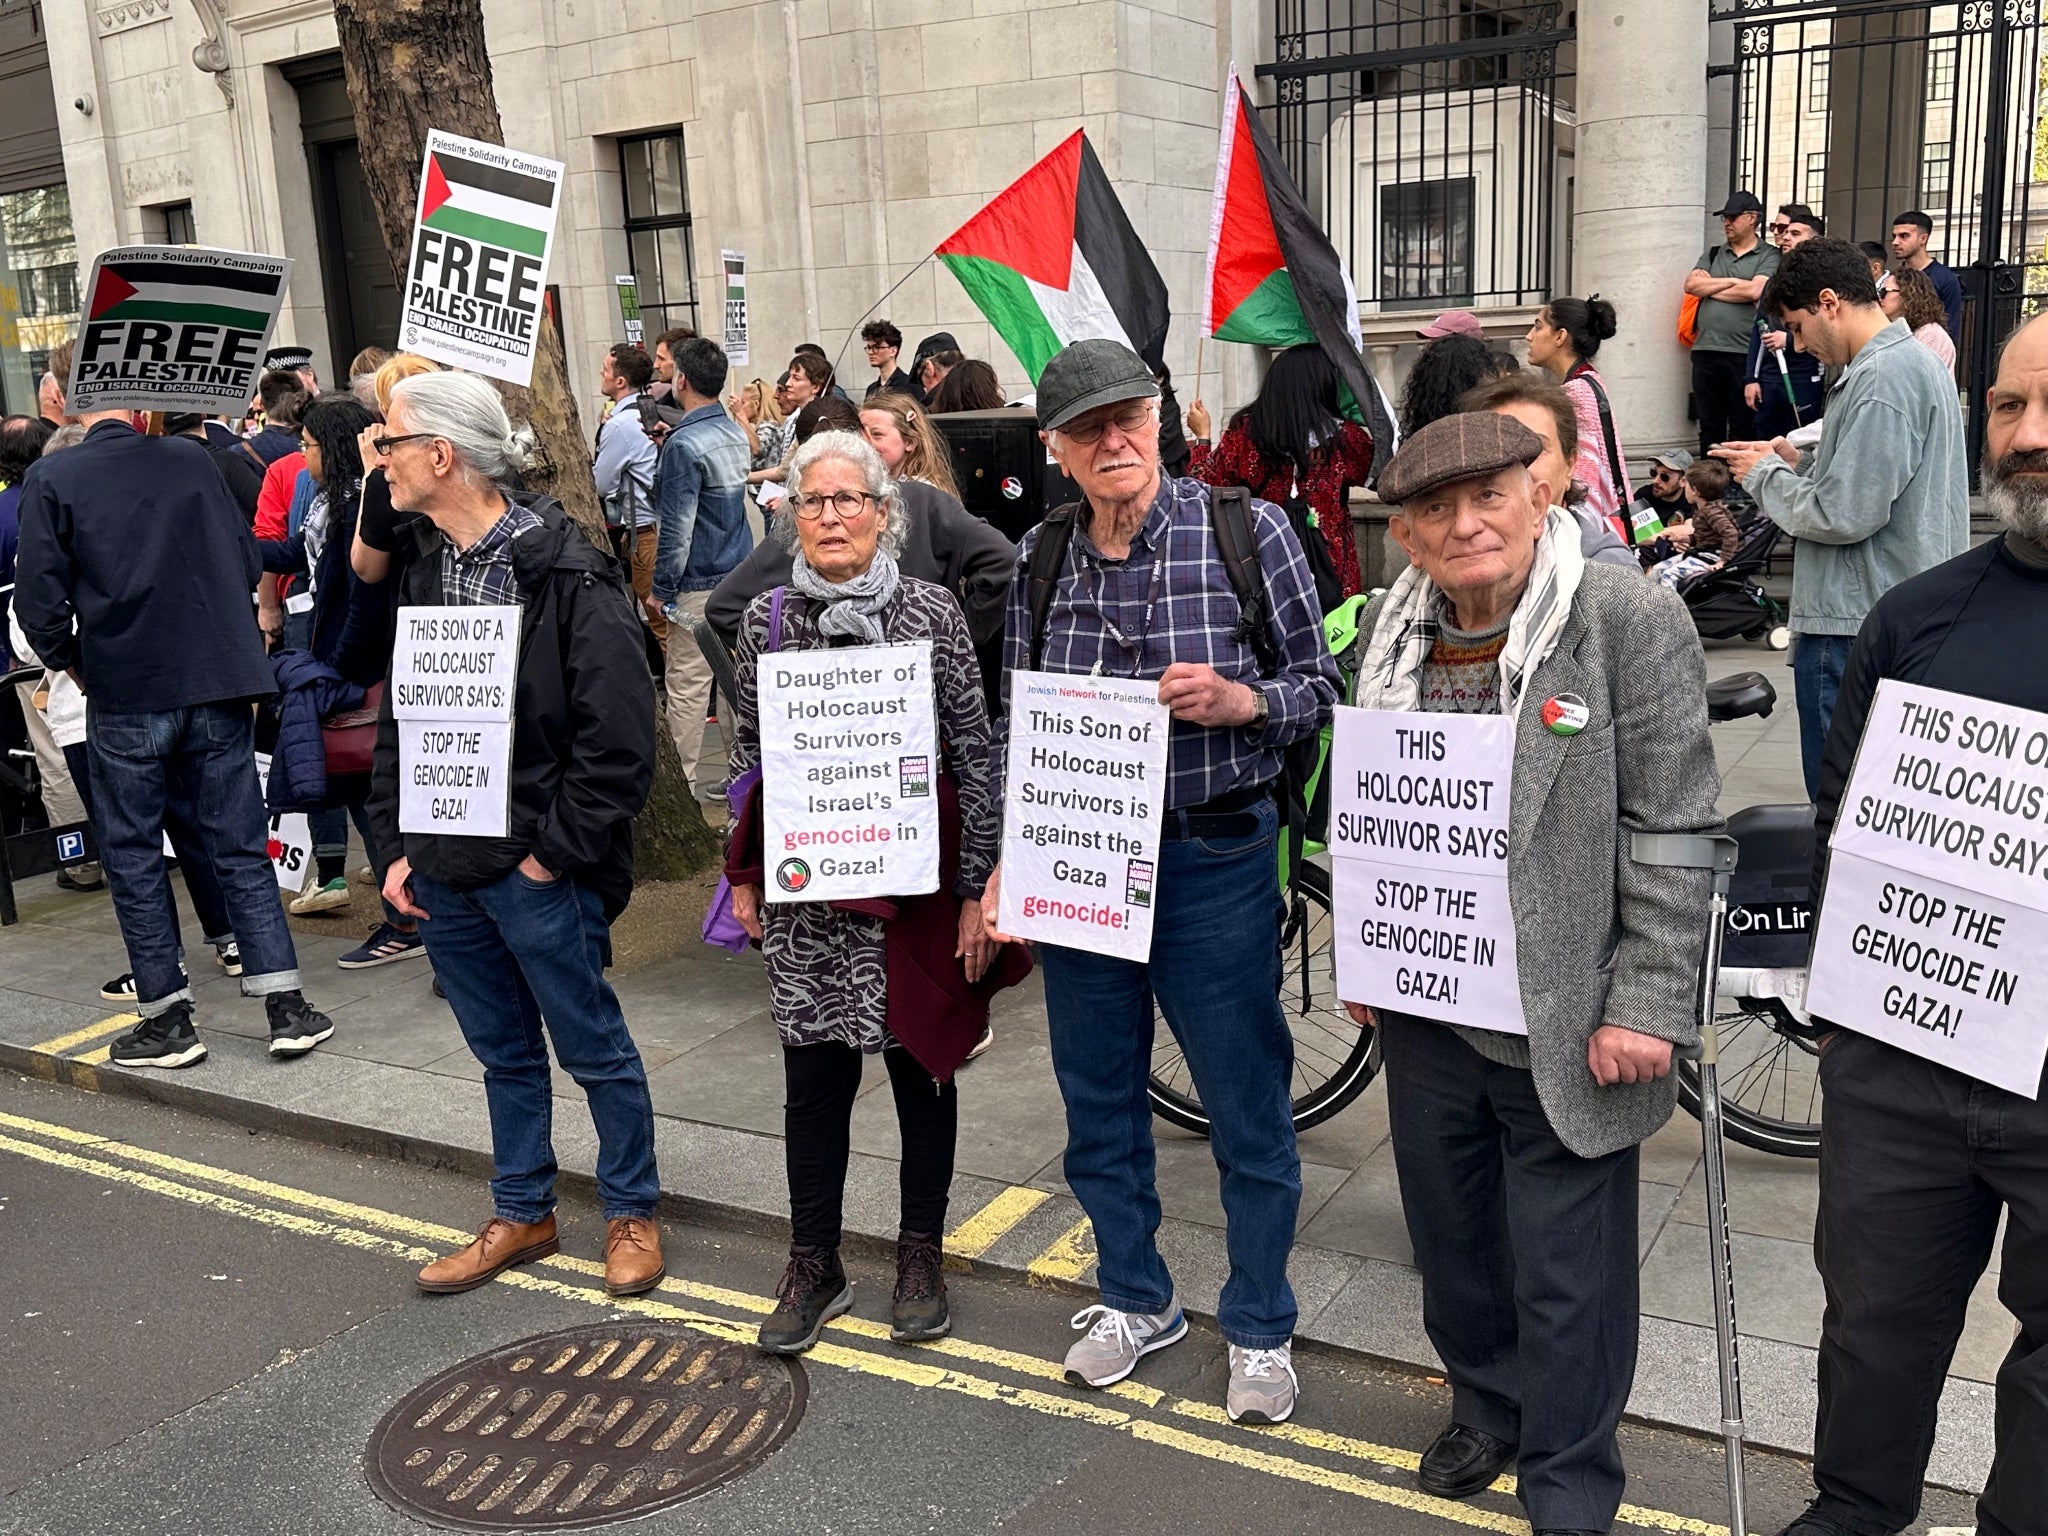 Four people related to Holocaust survivors, and one direct victims of the Holocaust, stand at a pro-Palestine march in support of the demonstration